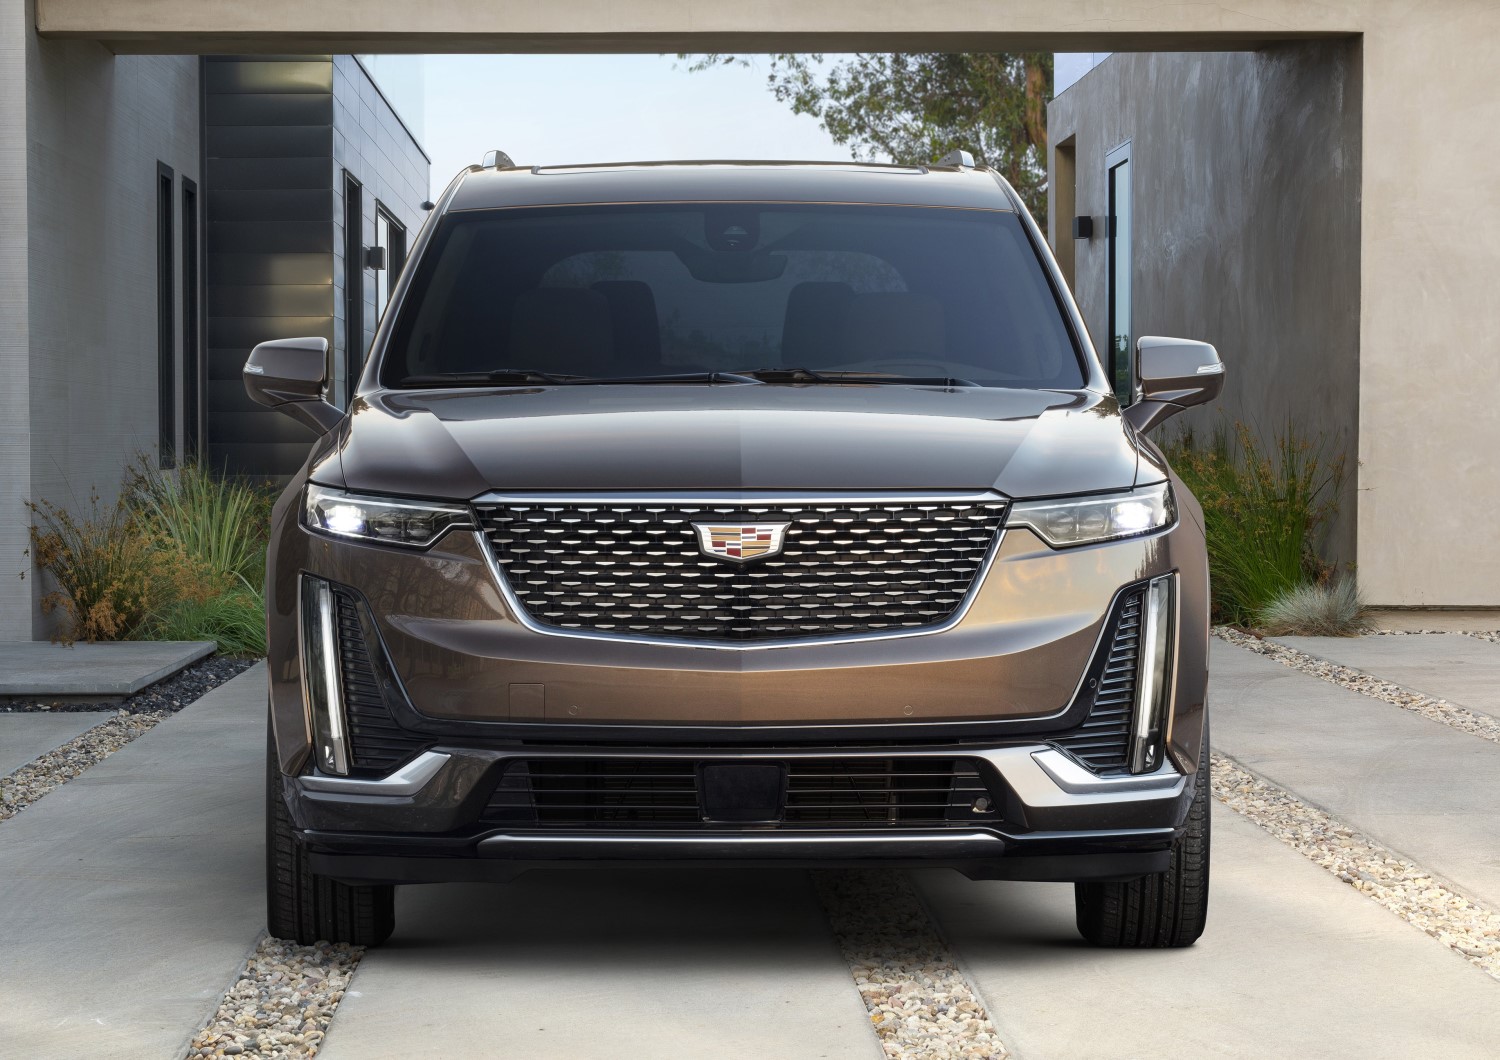 2020 Cadillac XT6 due out later this year